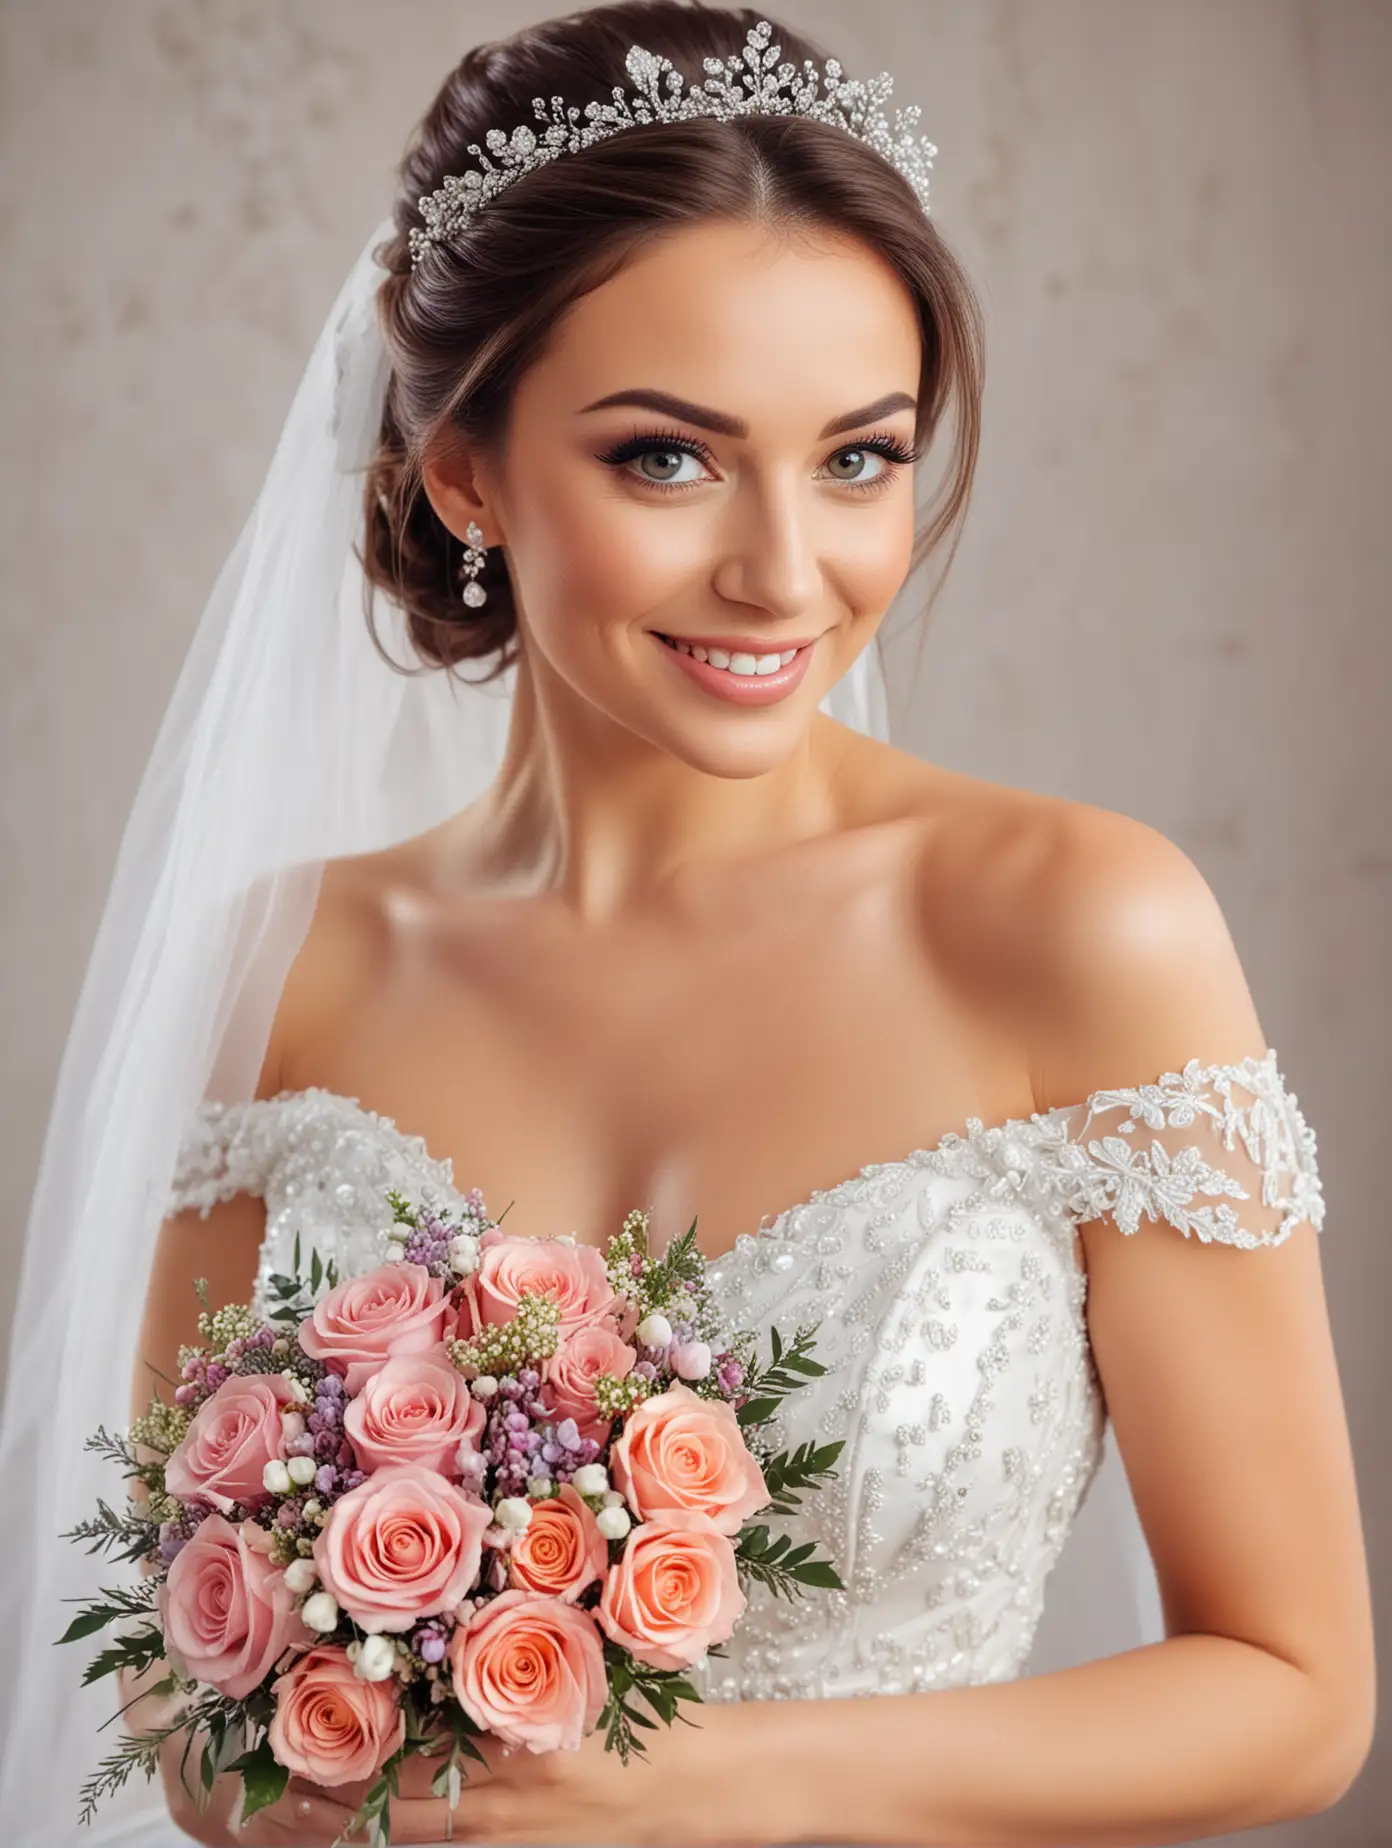 Beautiful bride with wedding bouquet, attractive woman in wedding dress. Happy newlywed woman. Bride with wedding makeup and hairstyle. Smiling bride. wedding day. Gorgeous bride. marry